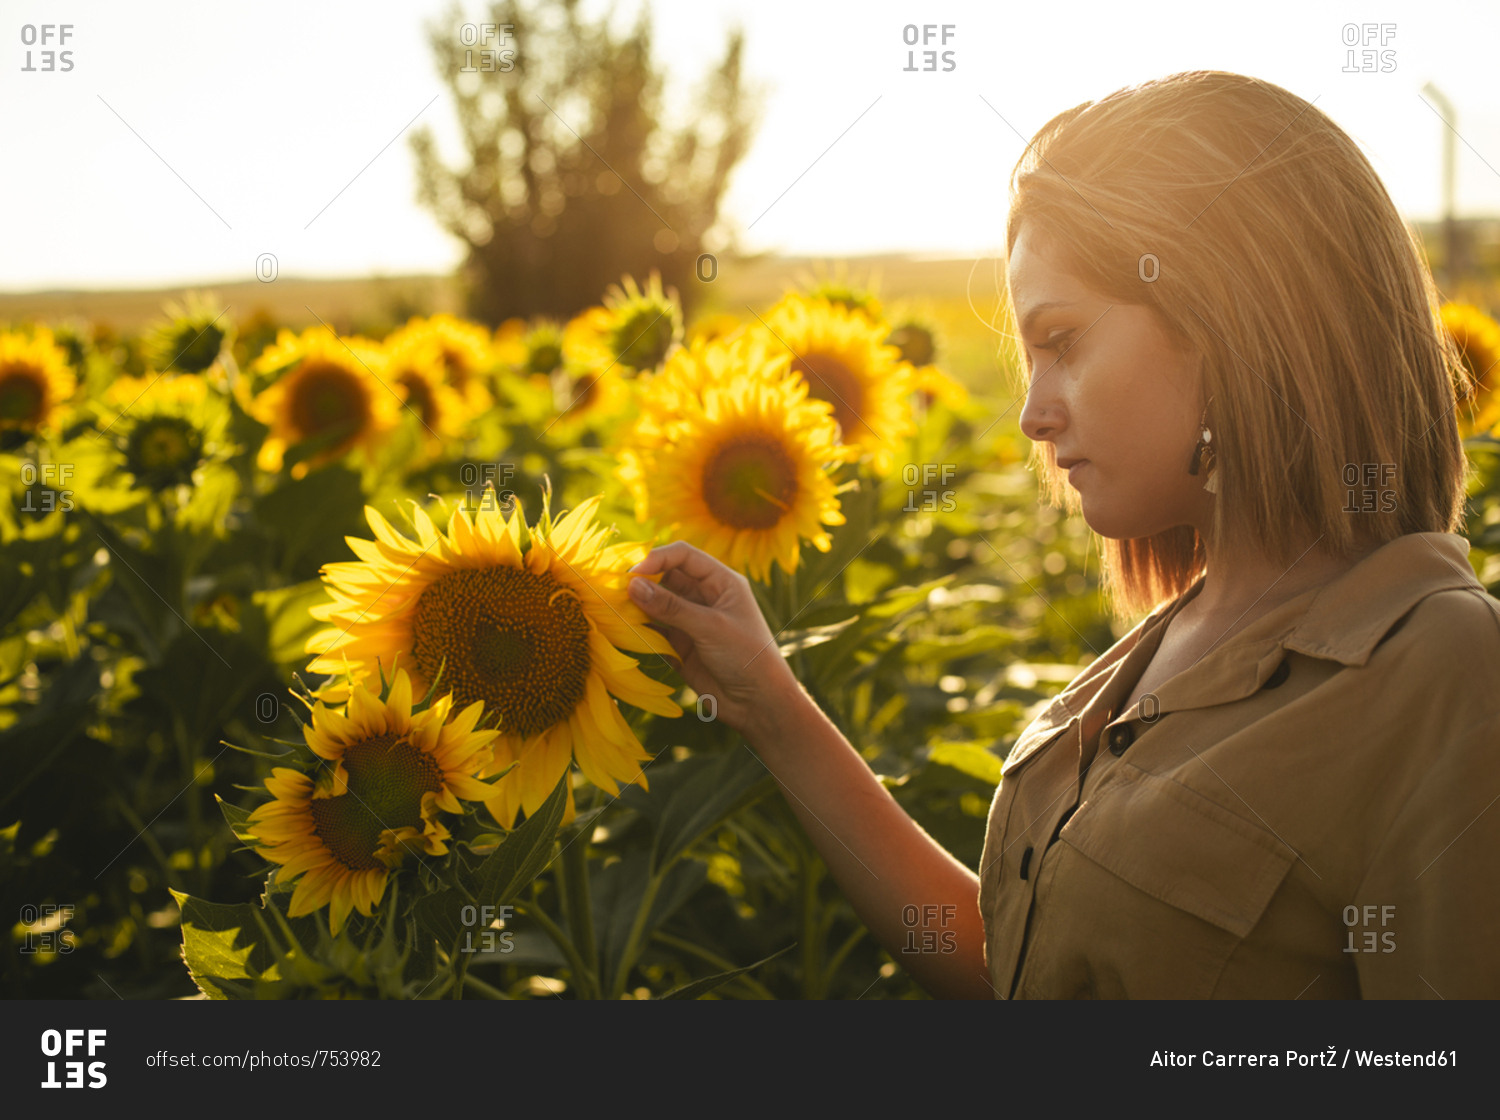 Portrait of a young woman in a sunflower field